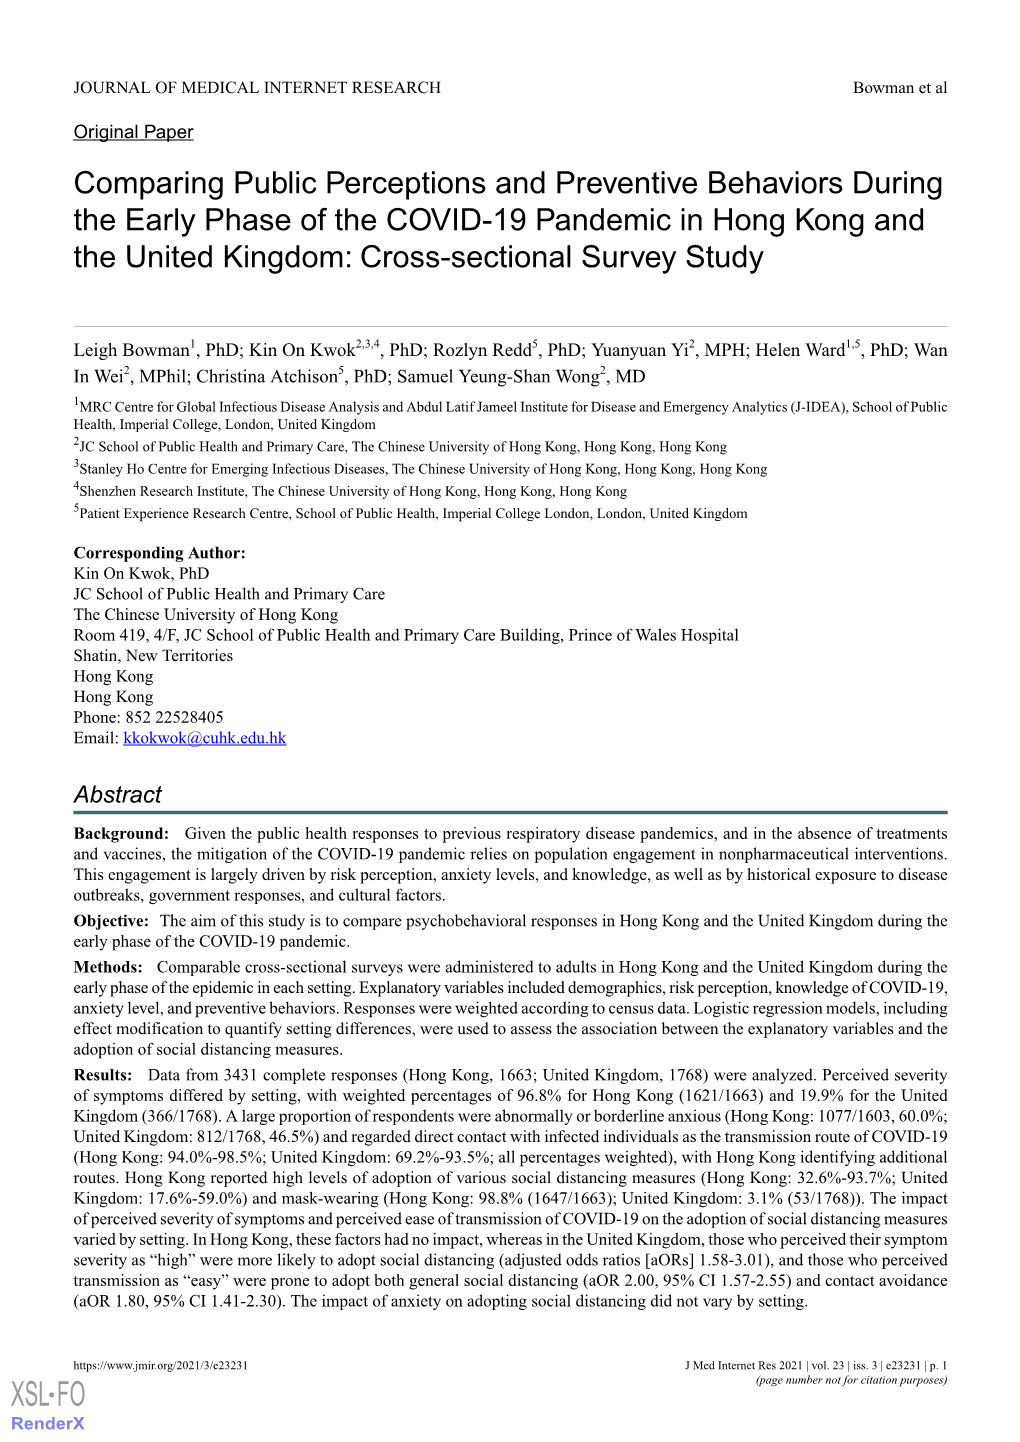 Comparing Public Perceptions and Preventive Behaviors During the Early Phase of the COVID-19 Pandemic in Hong Kong and the United Kingdom: Cross-Sectional Survey Study